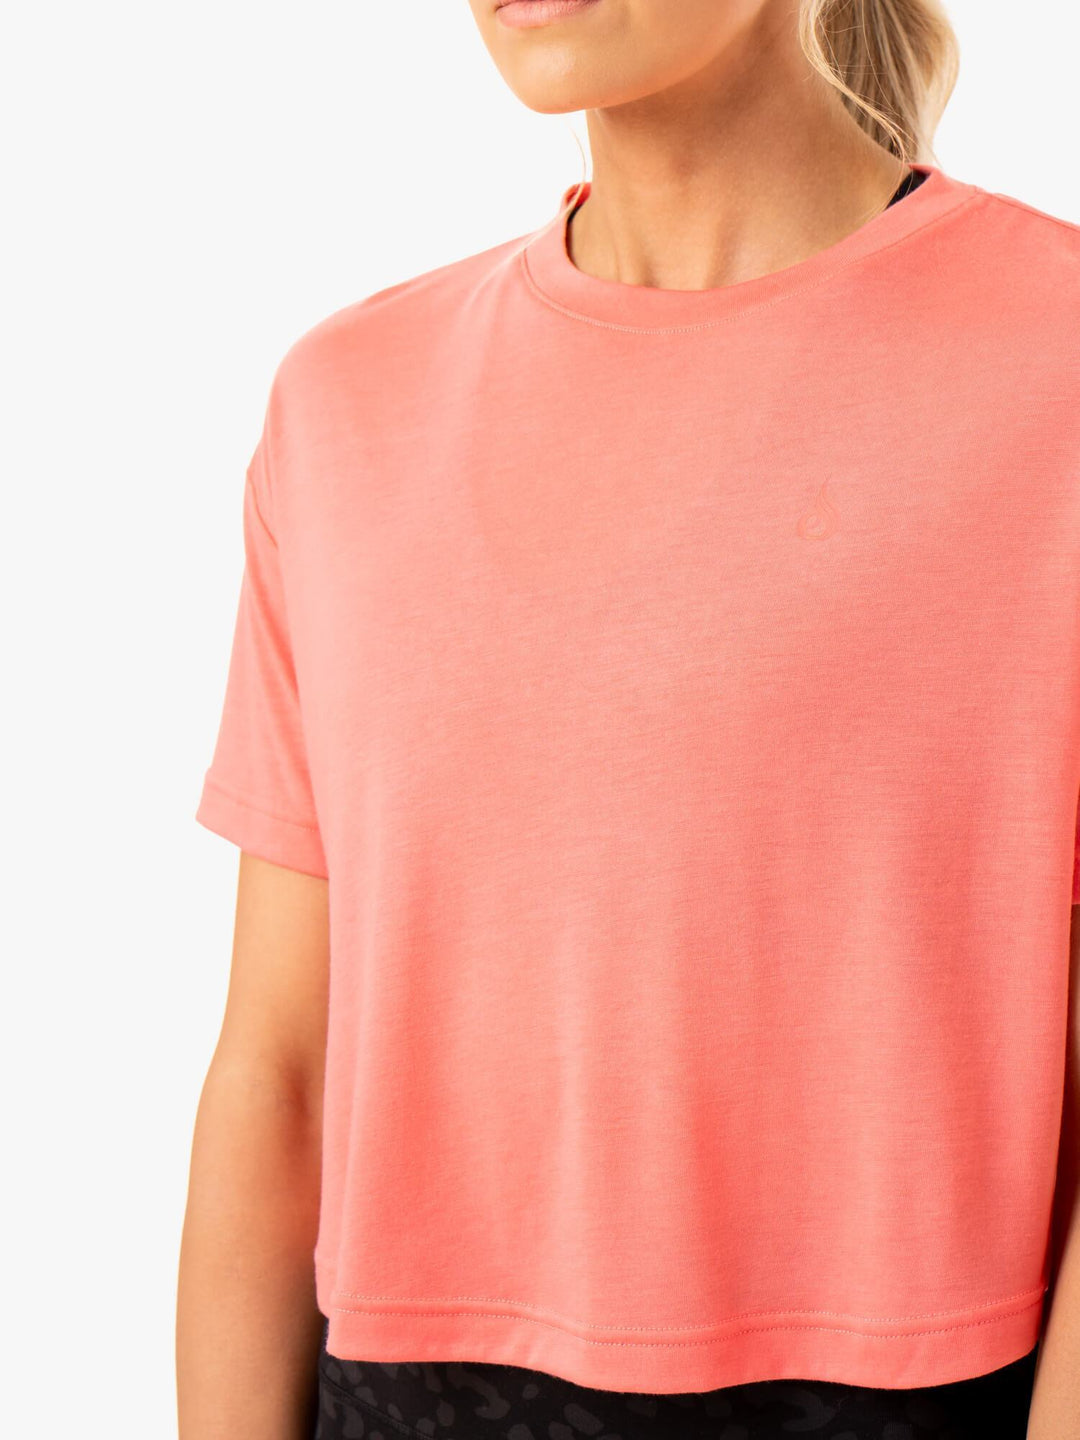 Ultra Scoop T-Shirt - Coral Clothing Ryderwear 